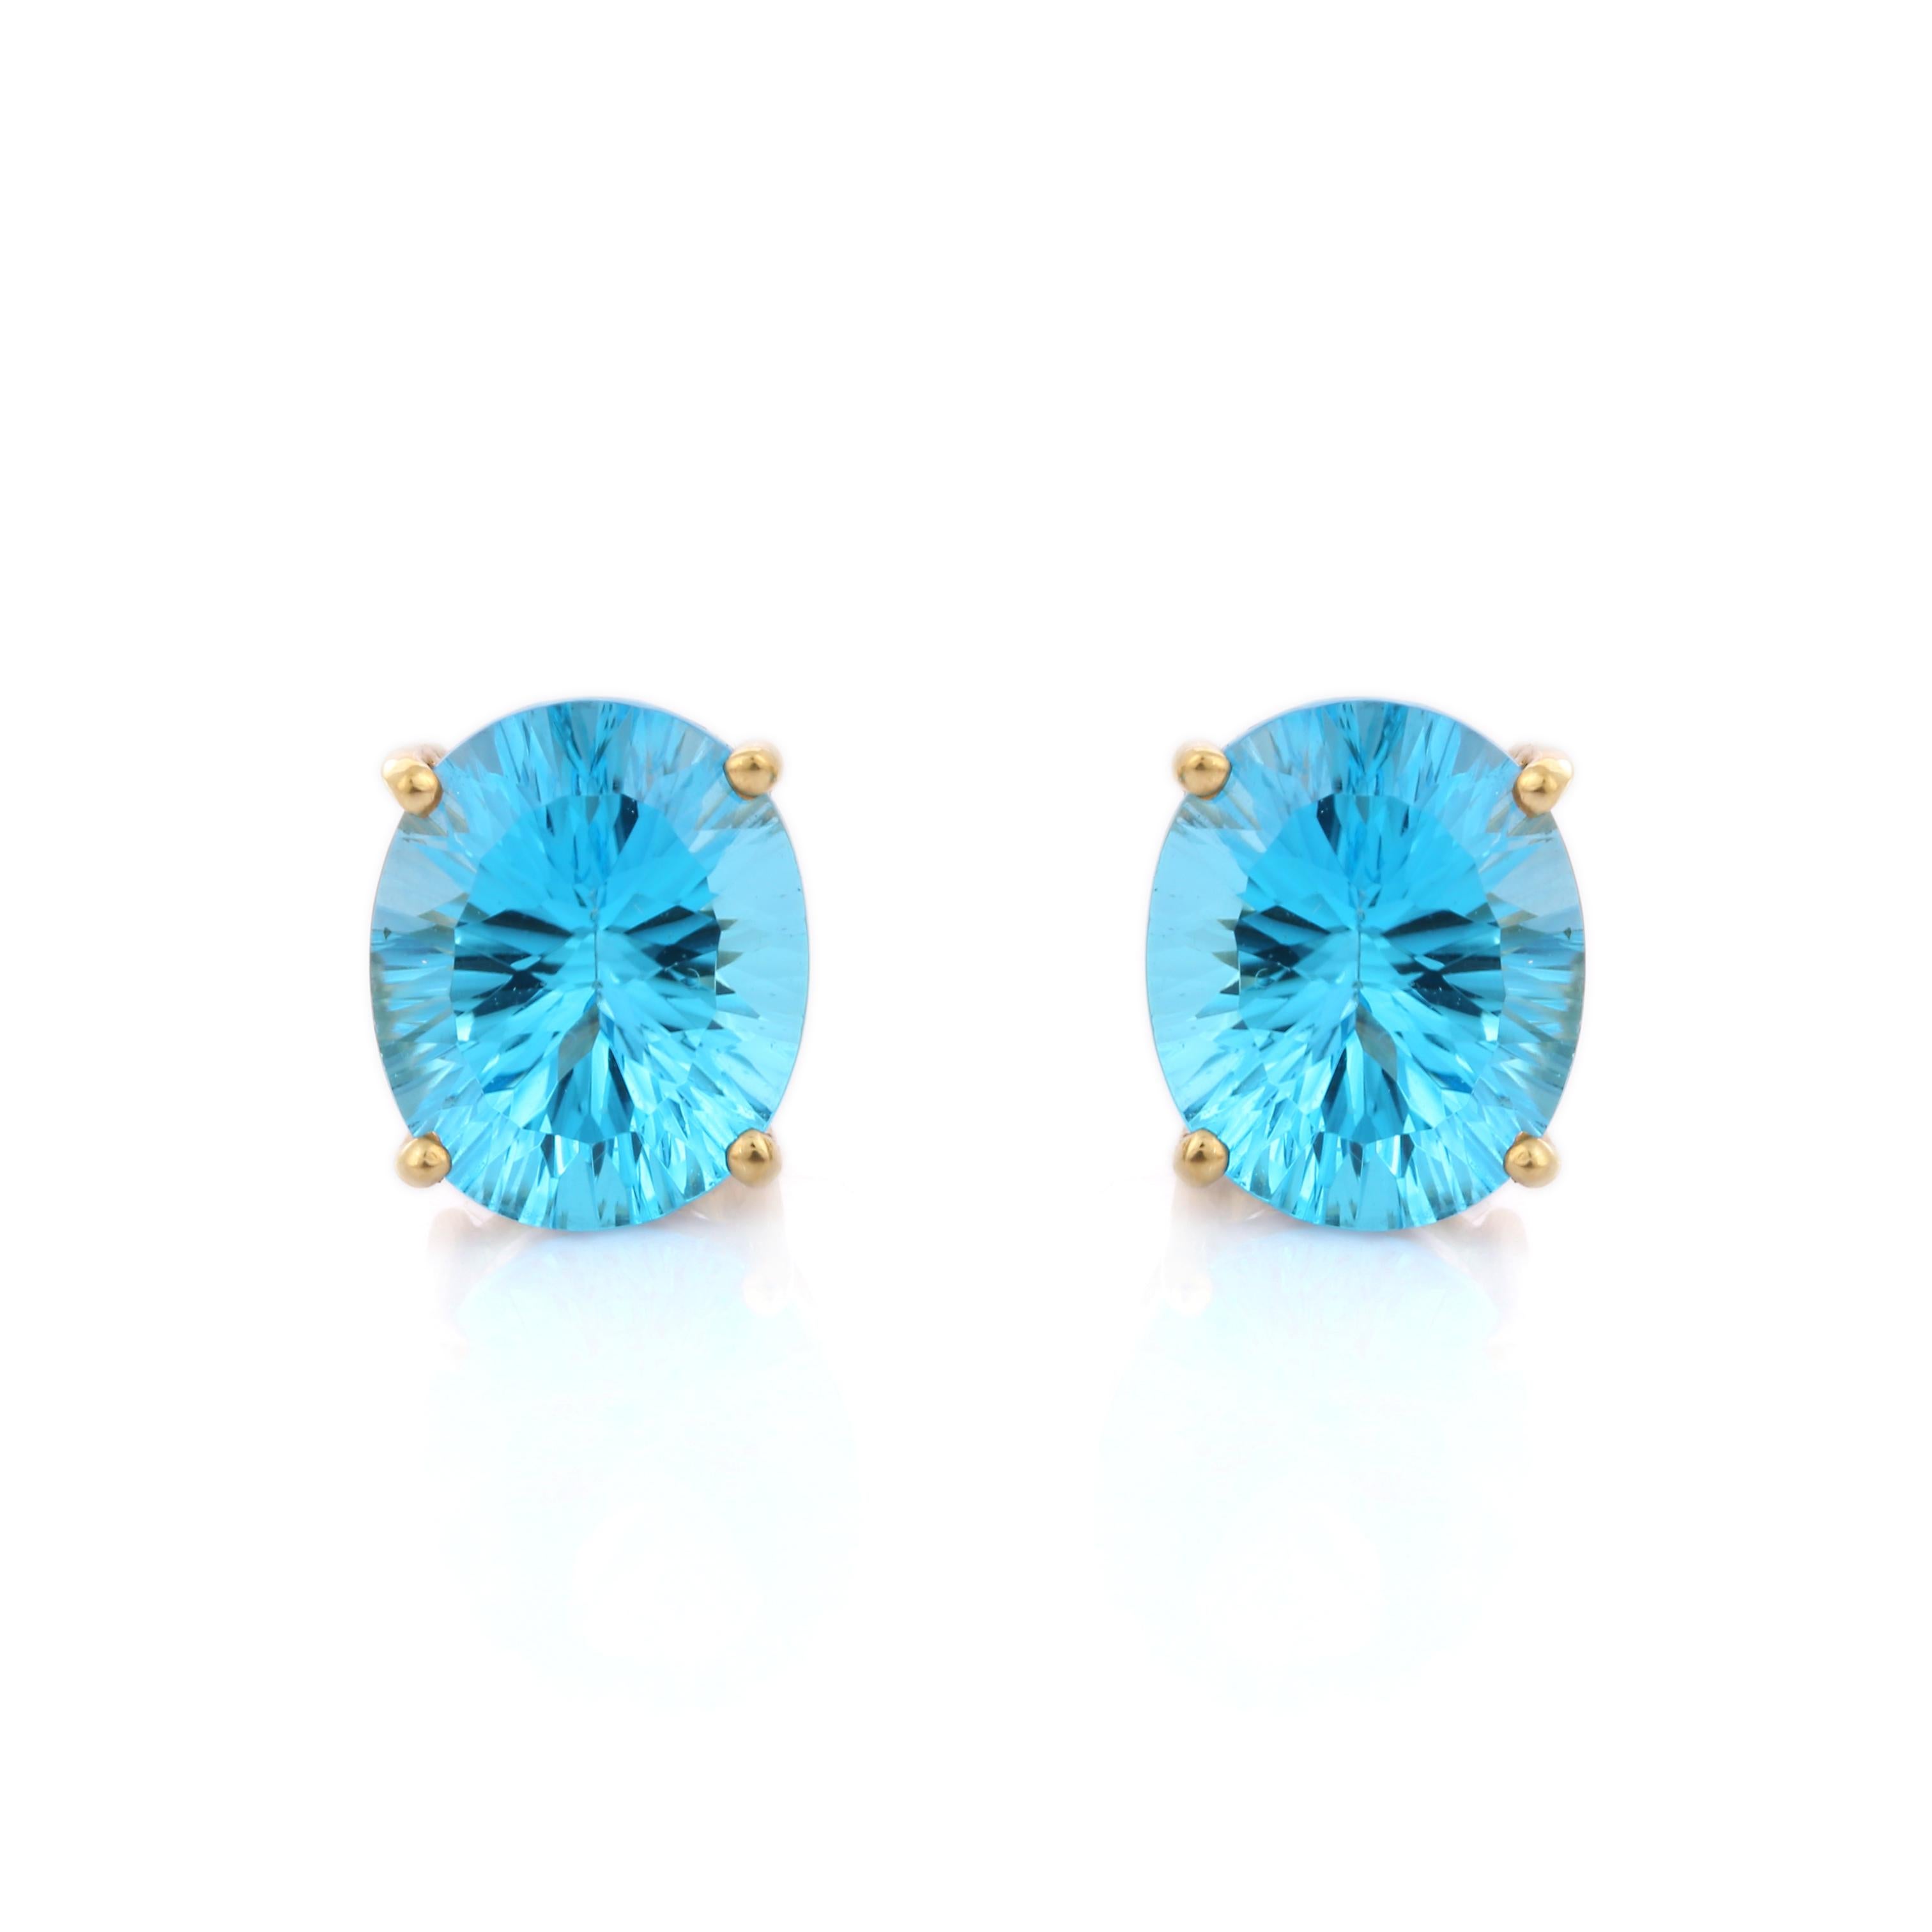 11 Ct Natural Blue Topaz Solitaire Stud Earrings Everyday Earrings in 10K Gold In New Condition For Sale In Houston, TX